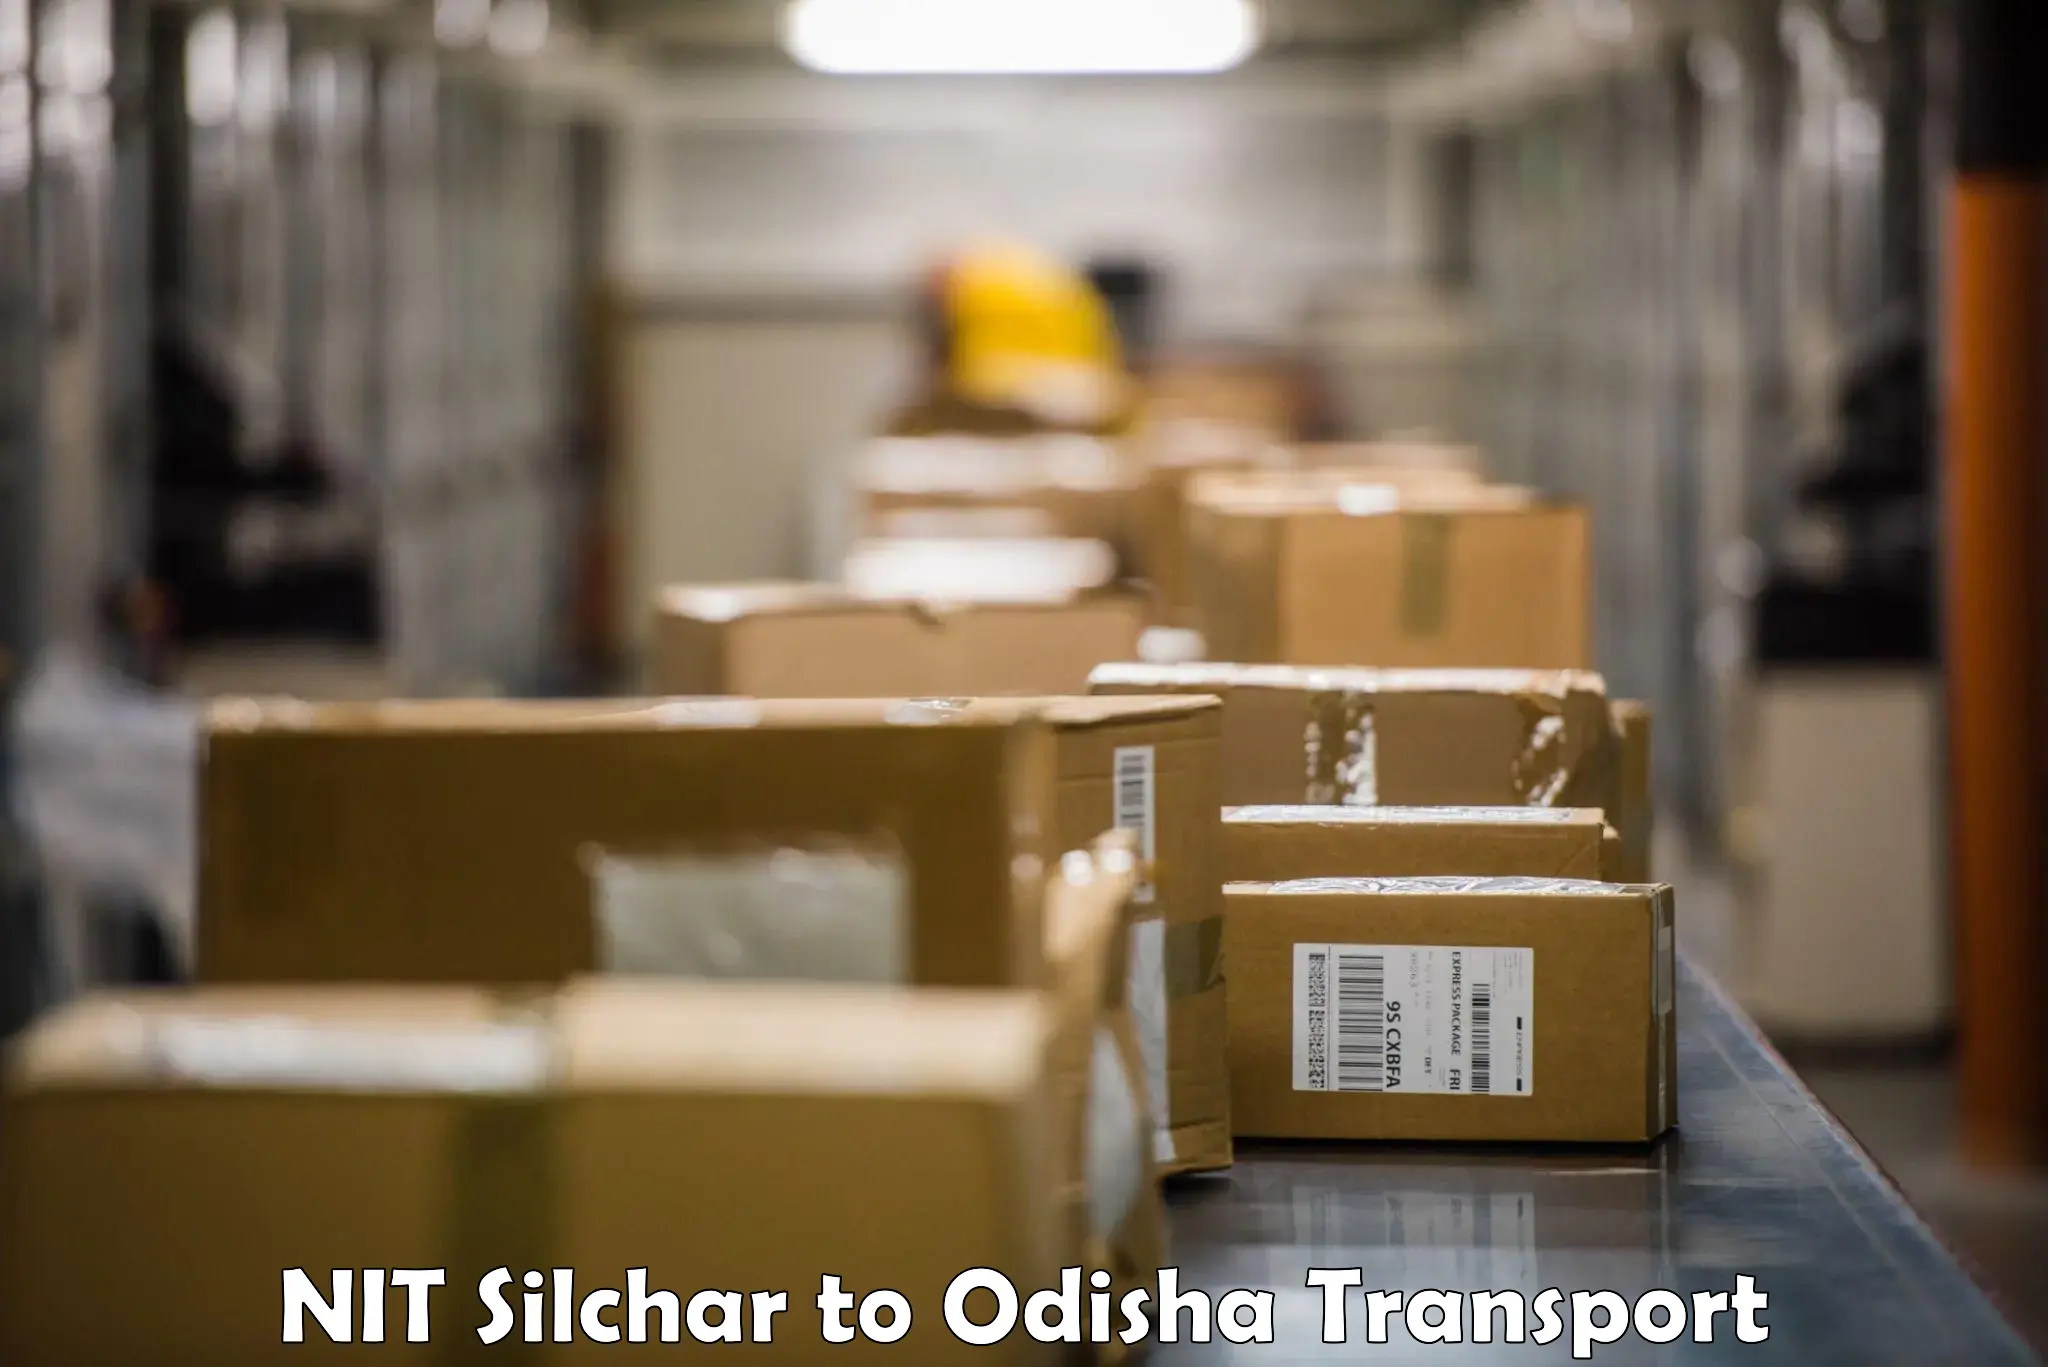 Express transport services in NIT Silchar to Sambalpur